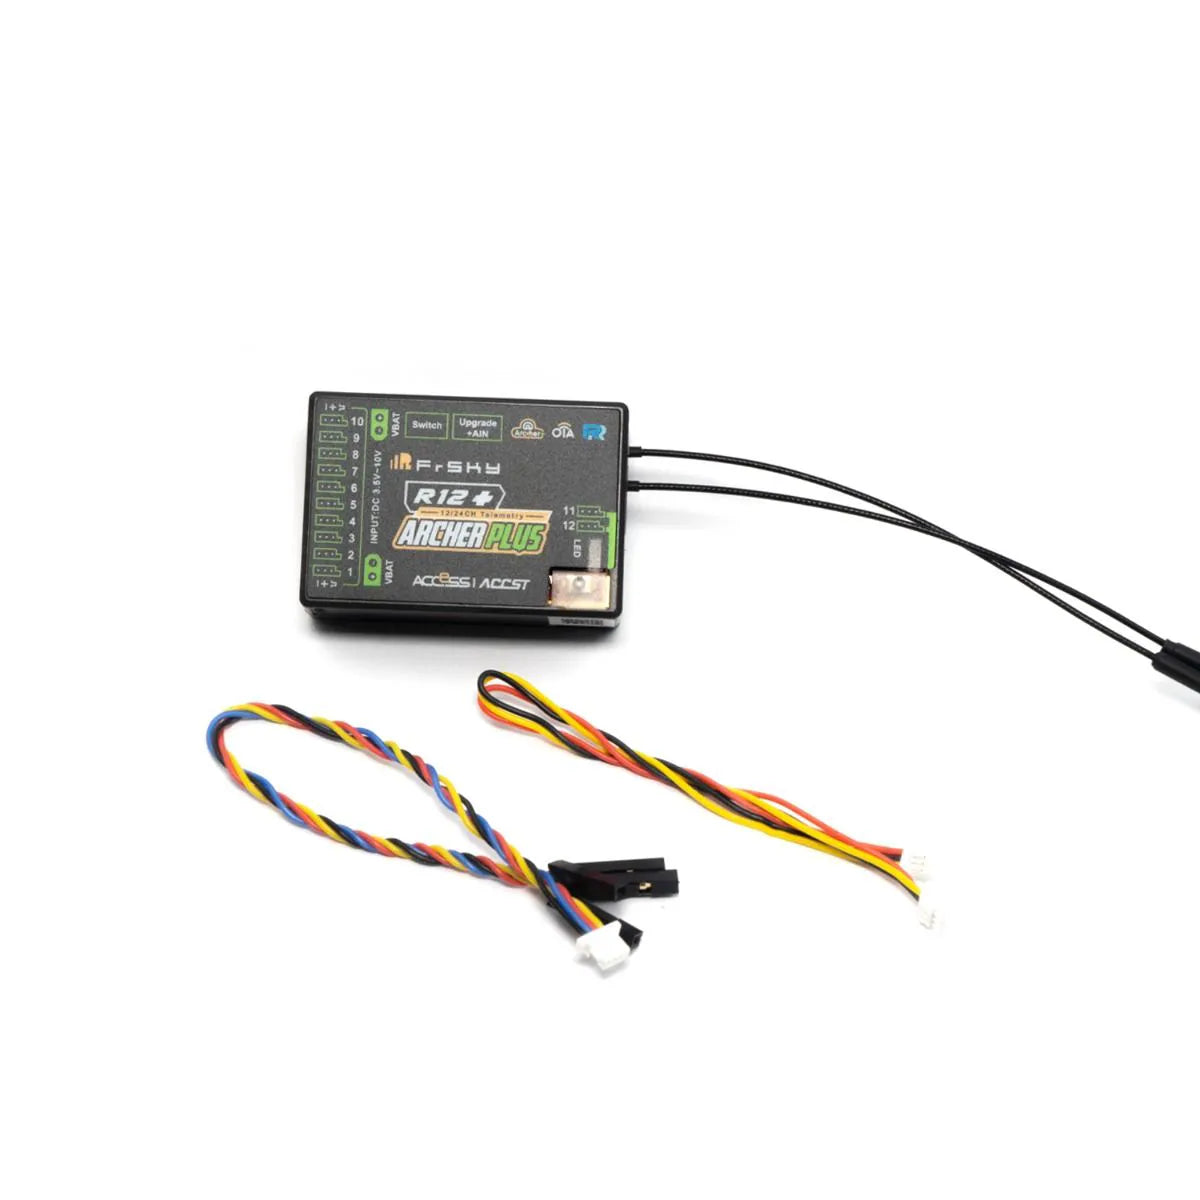 [03020118] FrSky ACCESS Archer Plus R12 Receiver with 12 Channel Ports